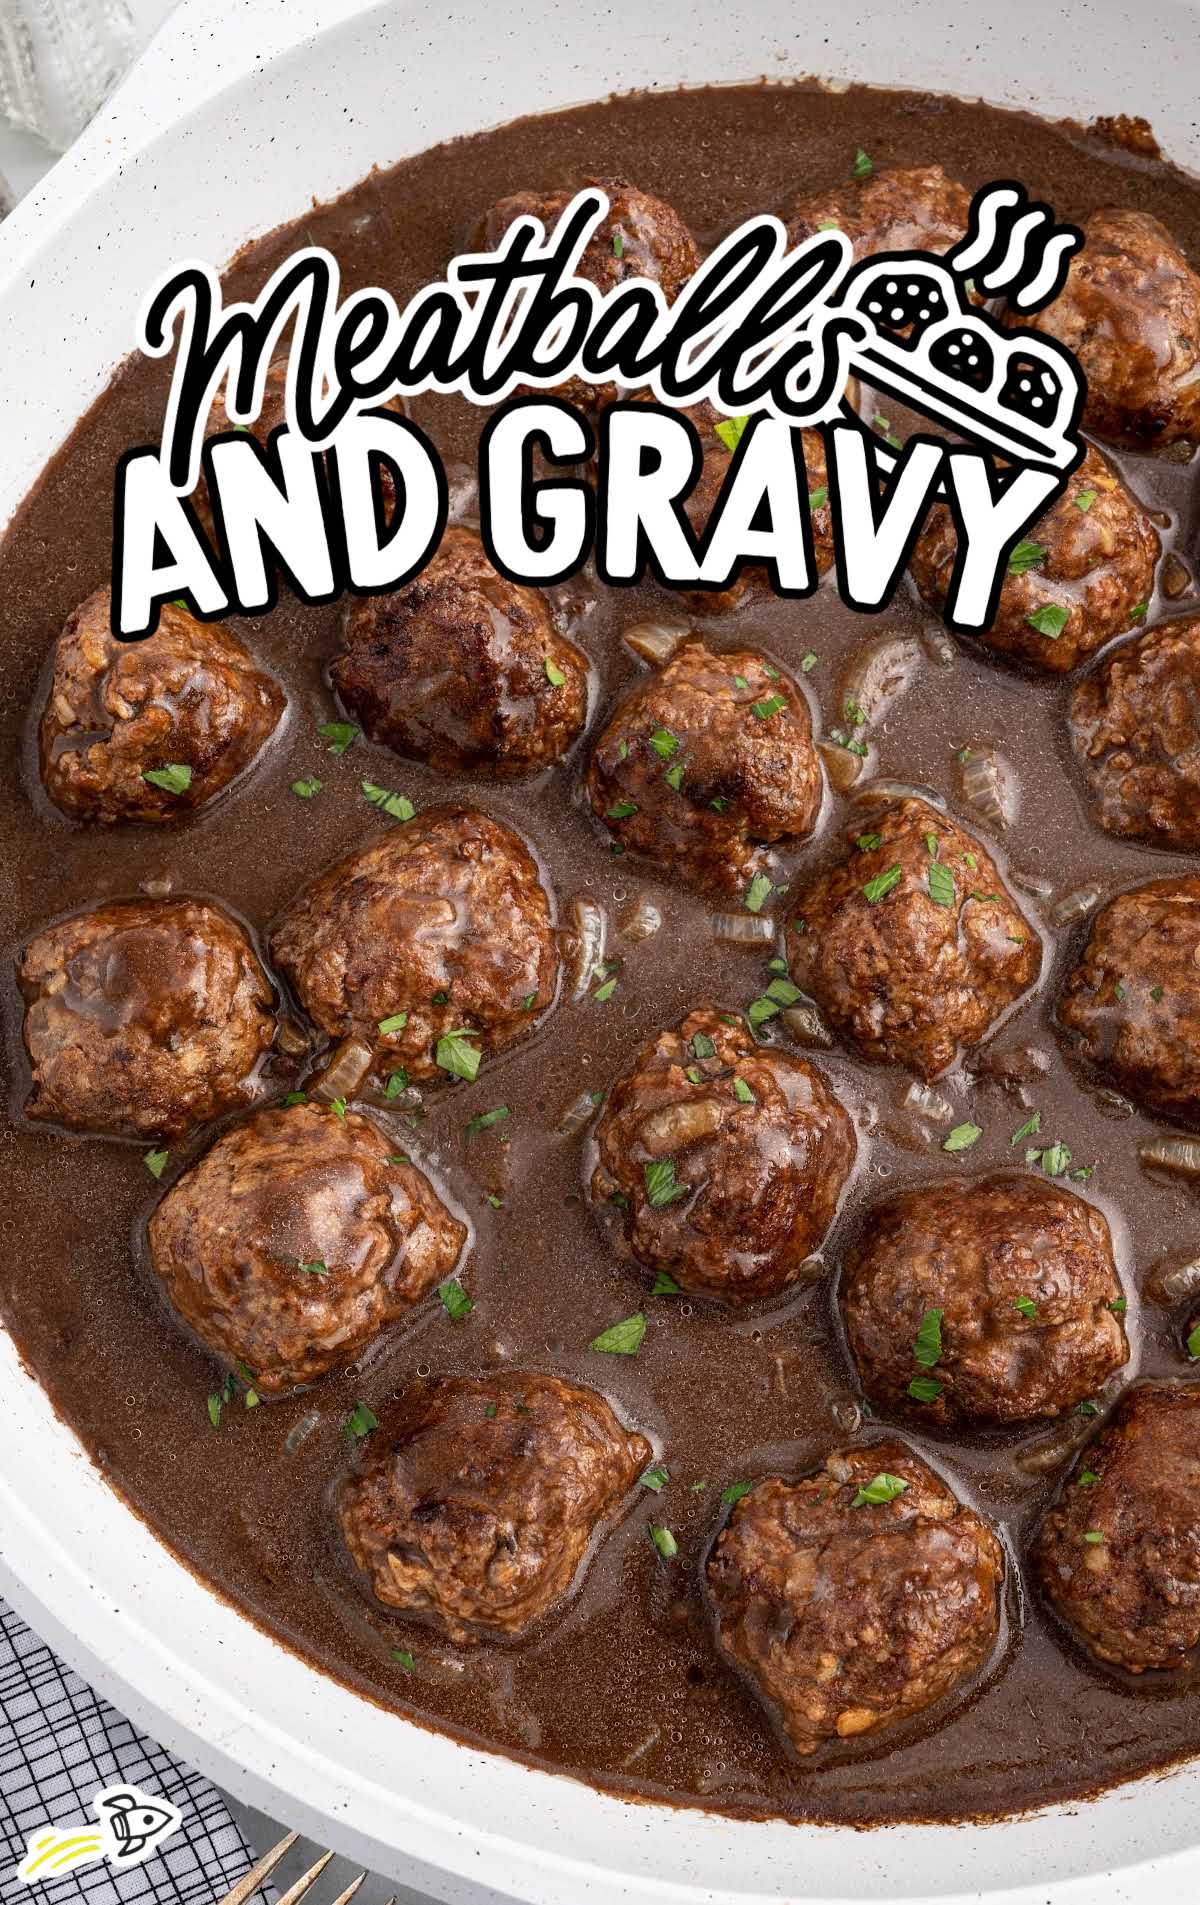 a pot of Meatballs and Gravy garnished with parsley